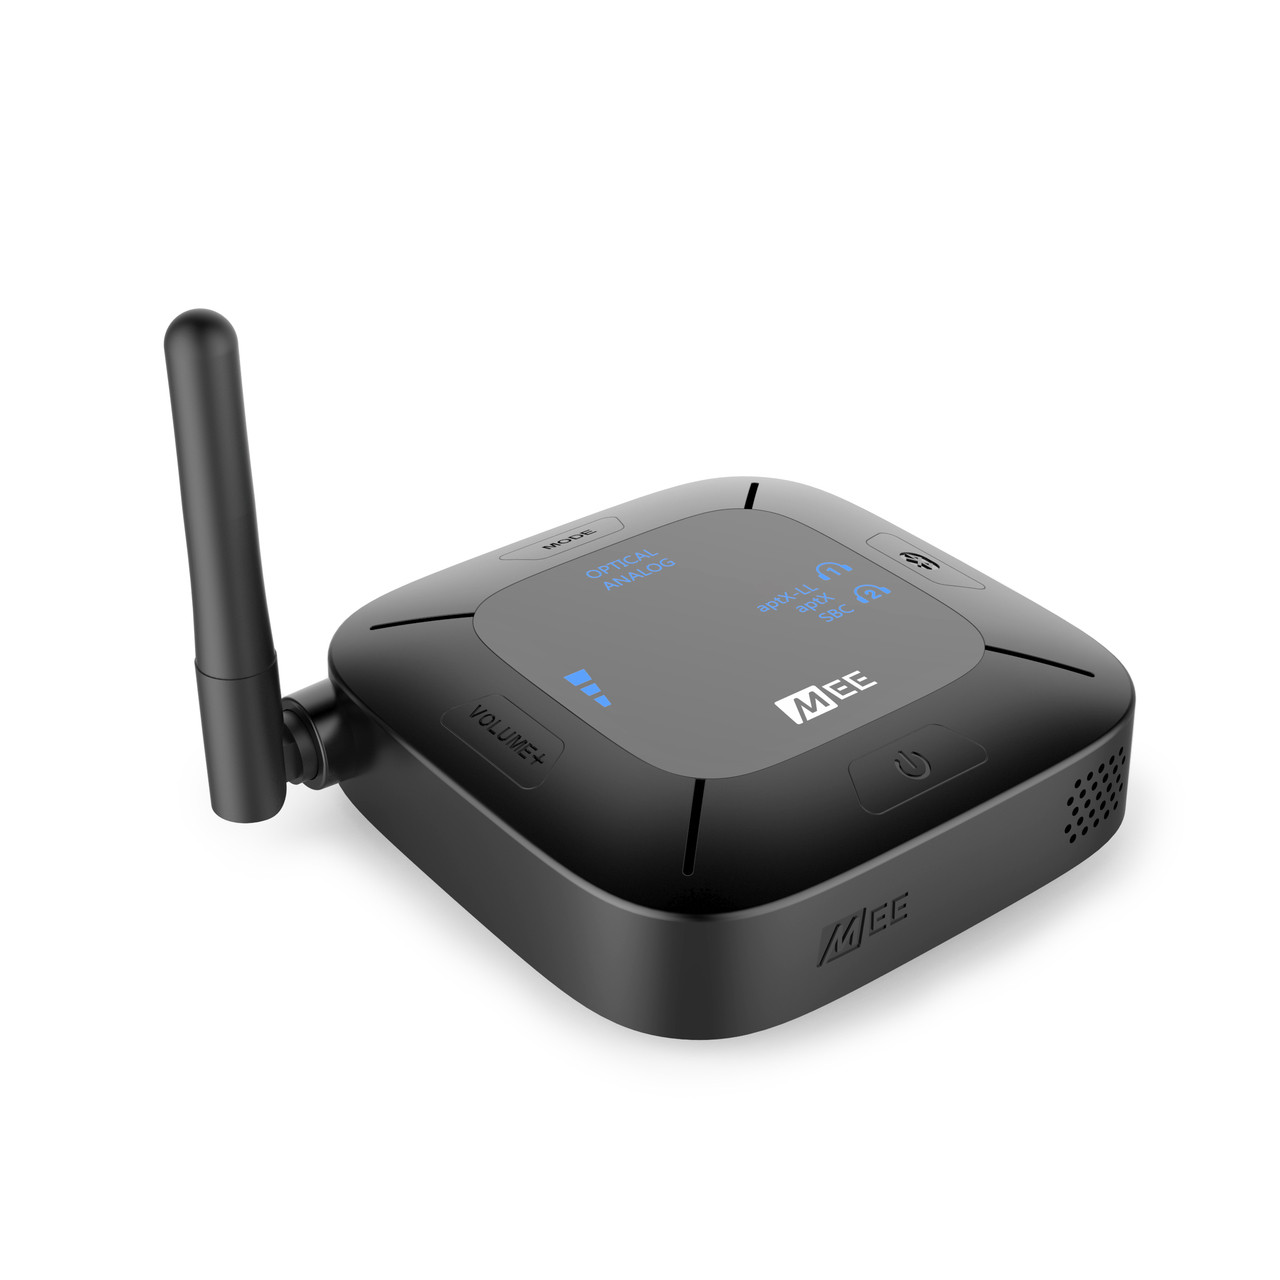 Connect Hub Universal Headphone and Speaker Bluetooth Audio and Receiver for TV with aptX Latency